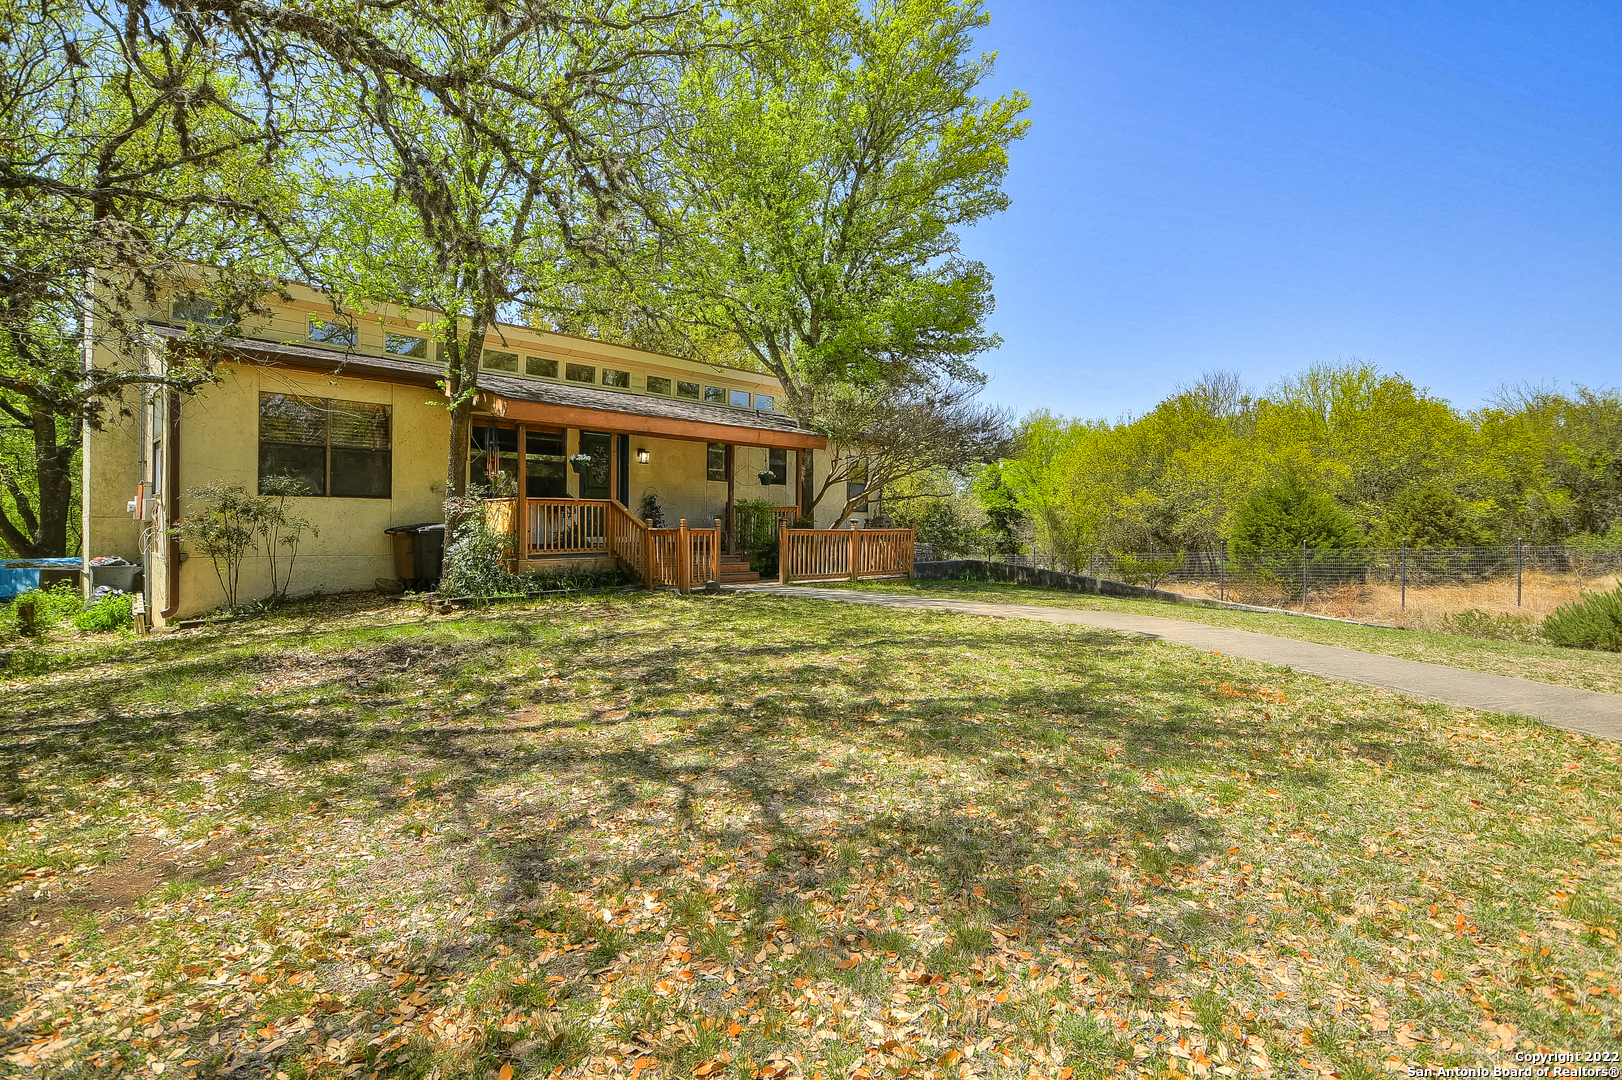 You don't want to miss out on this fantastic home in heart of the Texas Hill Country!  This home is full of charming accents like arched doorways, french doors, and built-ins!  There is an open kitchen with stainless steel appliances that looks out onto the front room.  New owners will love to sit in the sunroom with the large widows.  A covered back porch makes for a perfect place to watch the sunset.  The sprawling wooden deck lines the pool and has plenty of room for outdoor dining and sunbathing. Boerne Schools, easy access to I-10. This home was created with an inlaw suite in mind, primary living is on the main floor, down stairs is the inlaw suite, with a kitchen, living room, florida room off the primary bedroom with access to the patio.